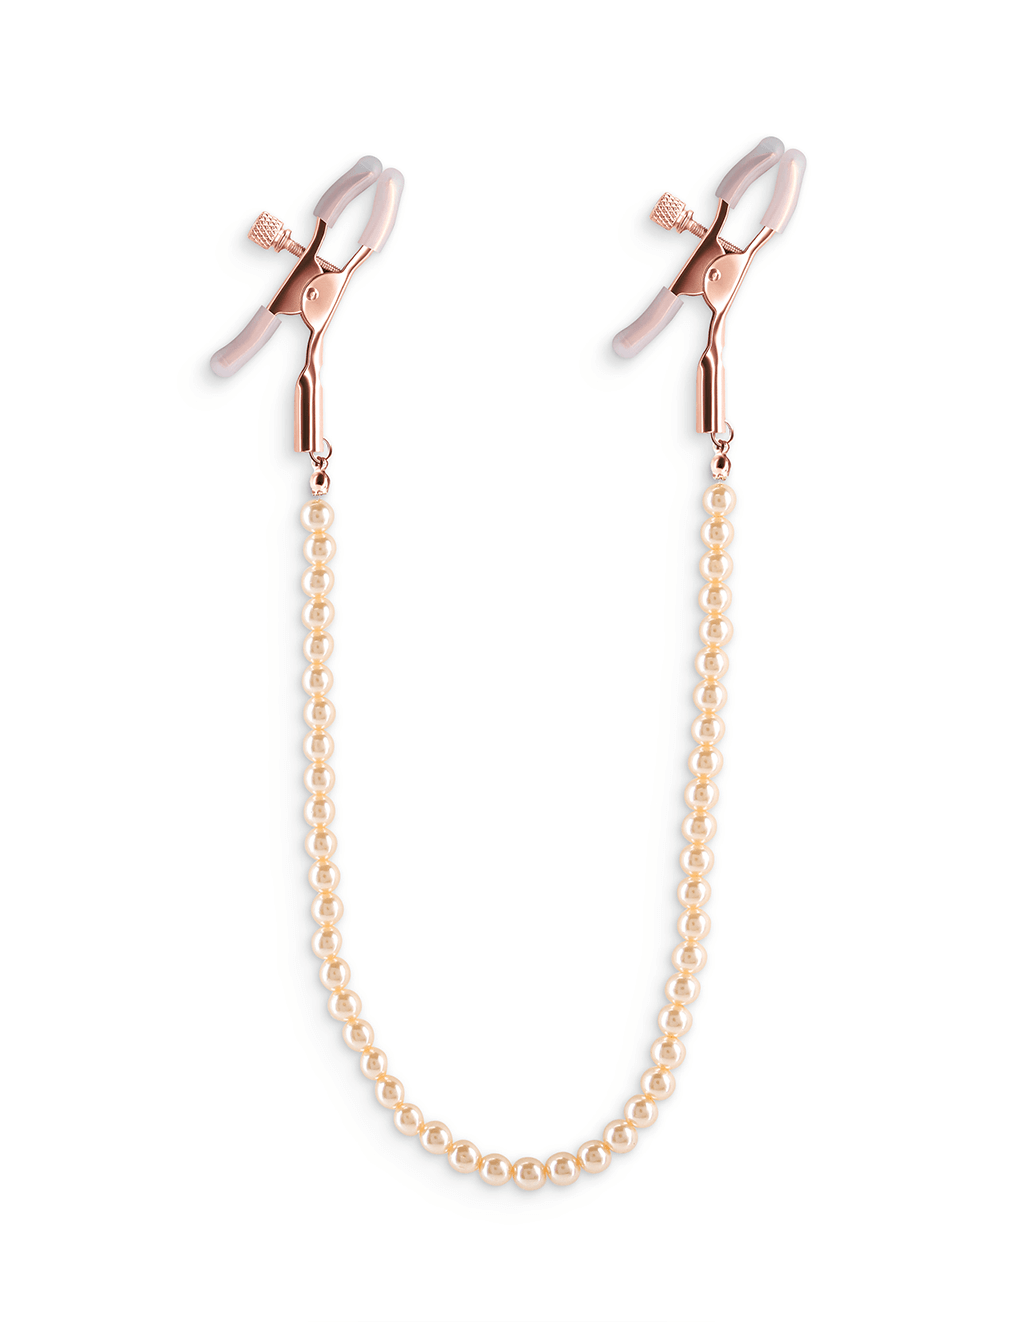 Adjustable Pearl Chain Clamps DC1 - Rose Gold